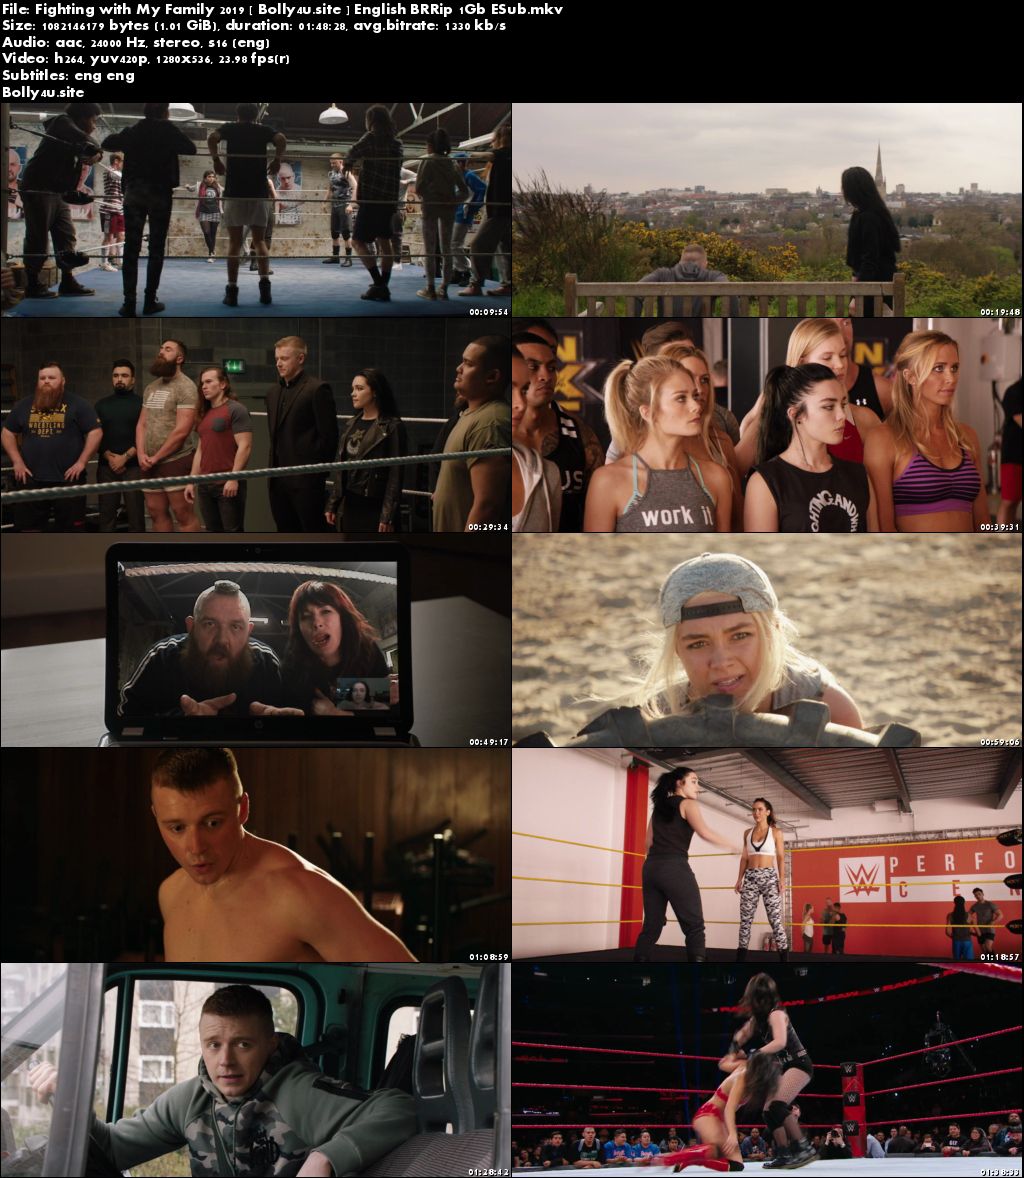 Fighting with My Family 2019 BRRip 1GB English 720p ESub Download